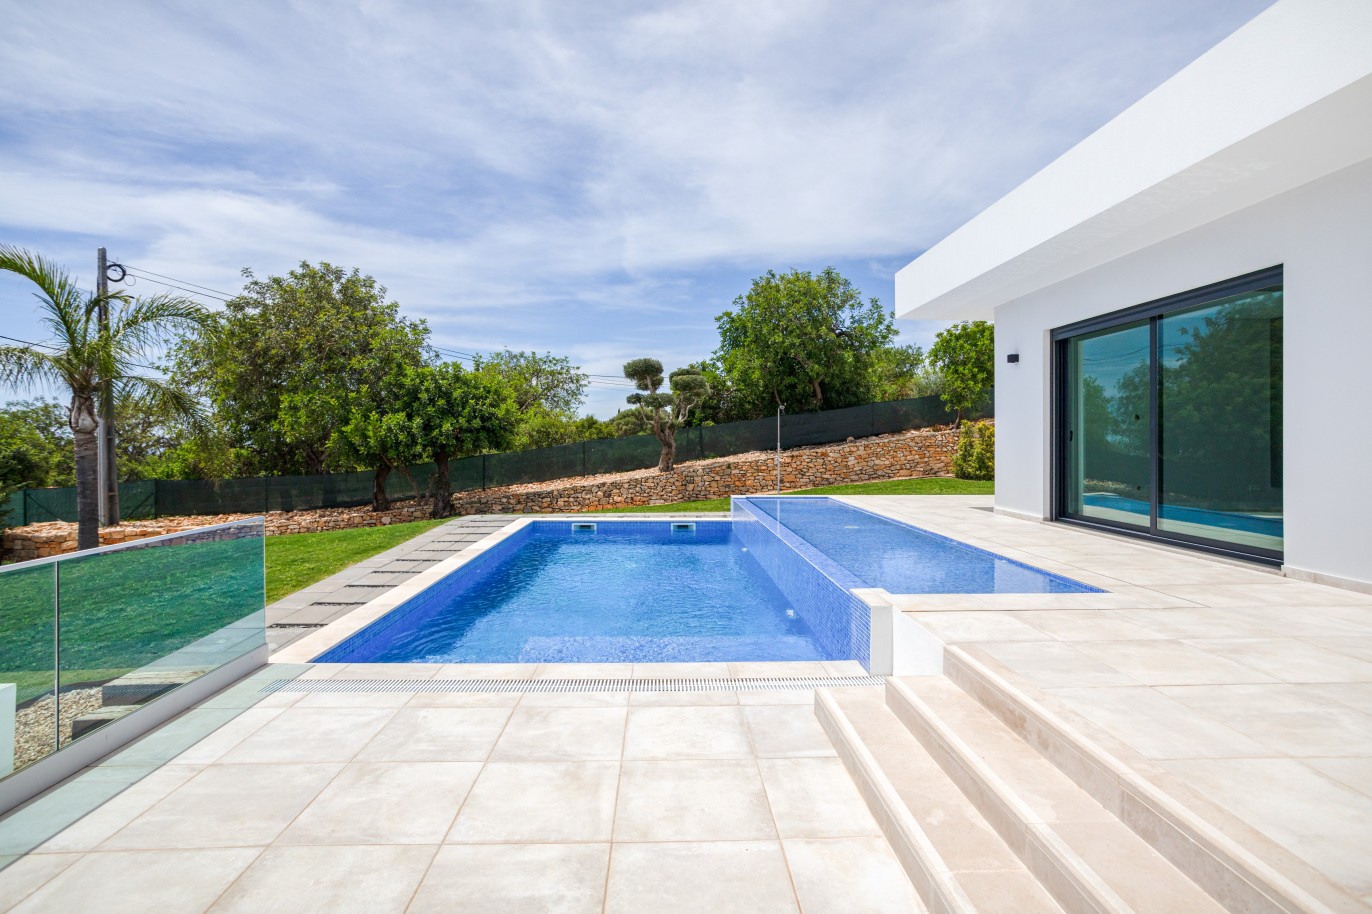 4+1 Bedroom Villa with pool and sea view, for sale in Loulé, Algarve_225773